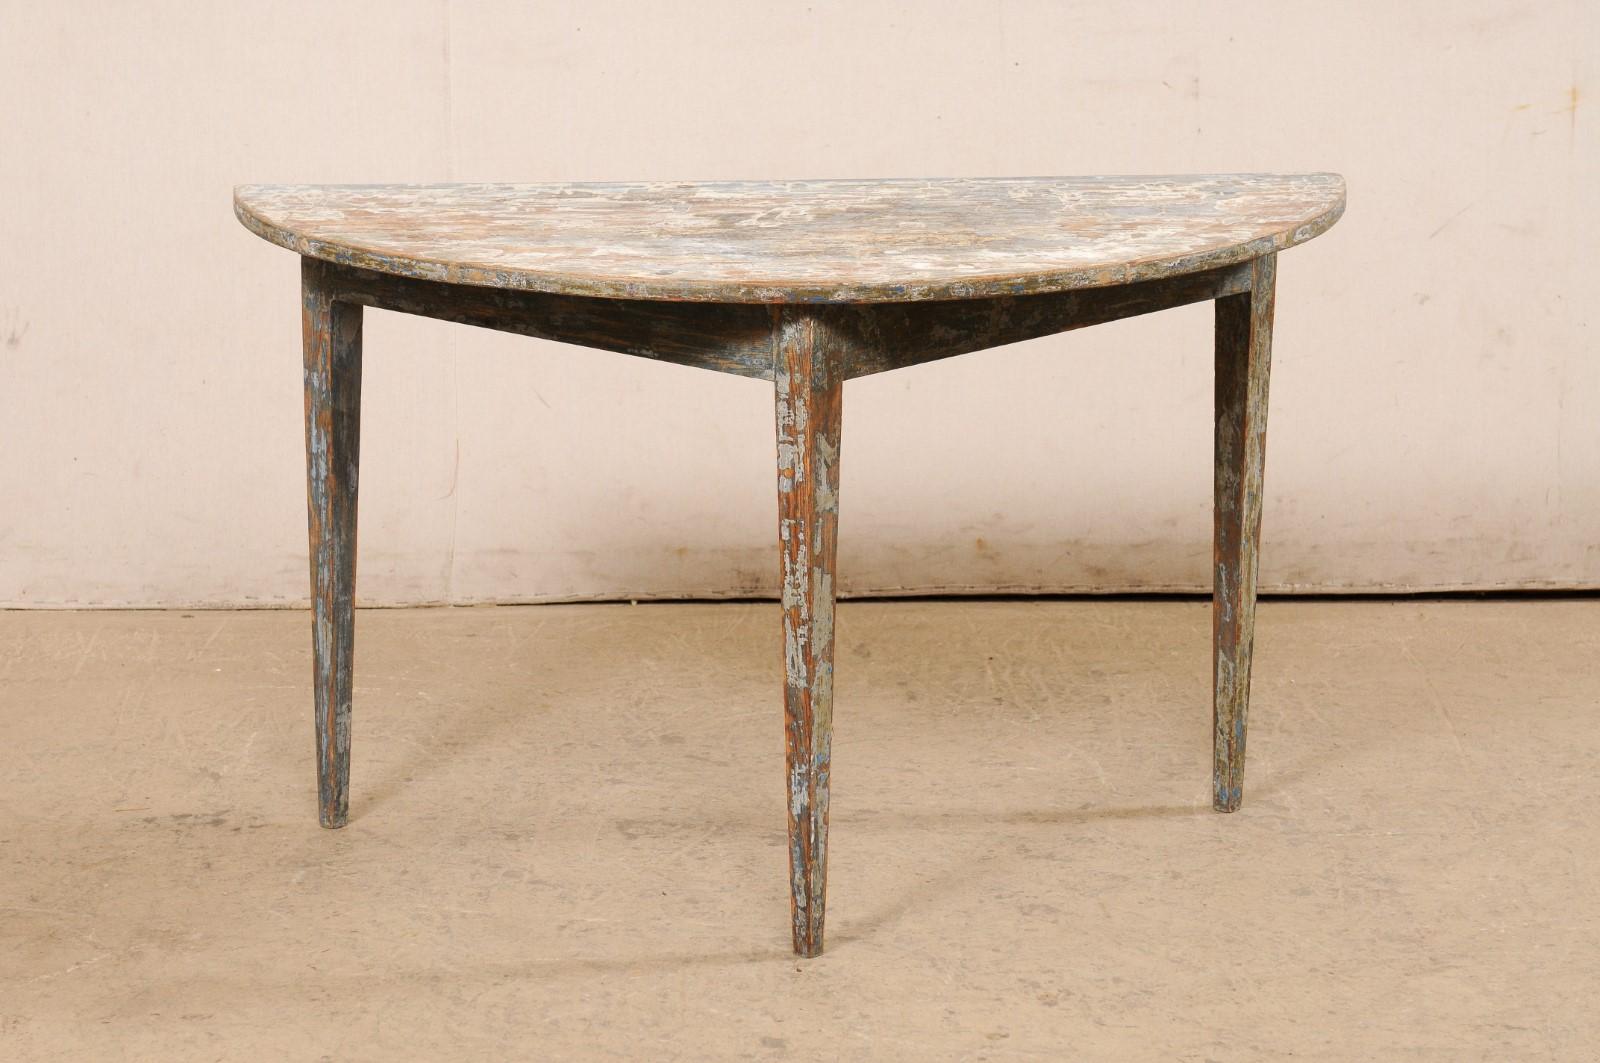 A single Swedish wooden demi-lune console table from the 19th century. This antique table from Sweden features a semi-circular, or half moon top, over a triangular shaped apron. The skirt is clean and plain, and the piece is raised upon three